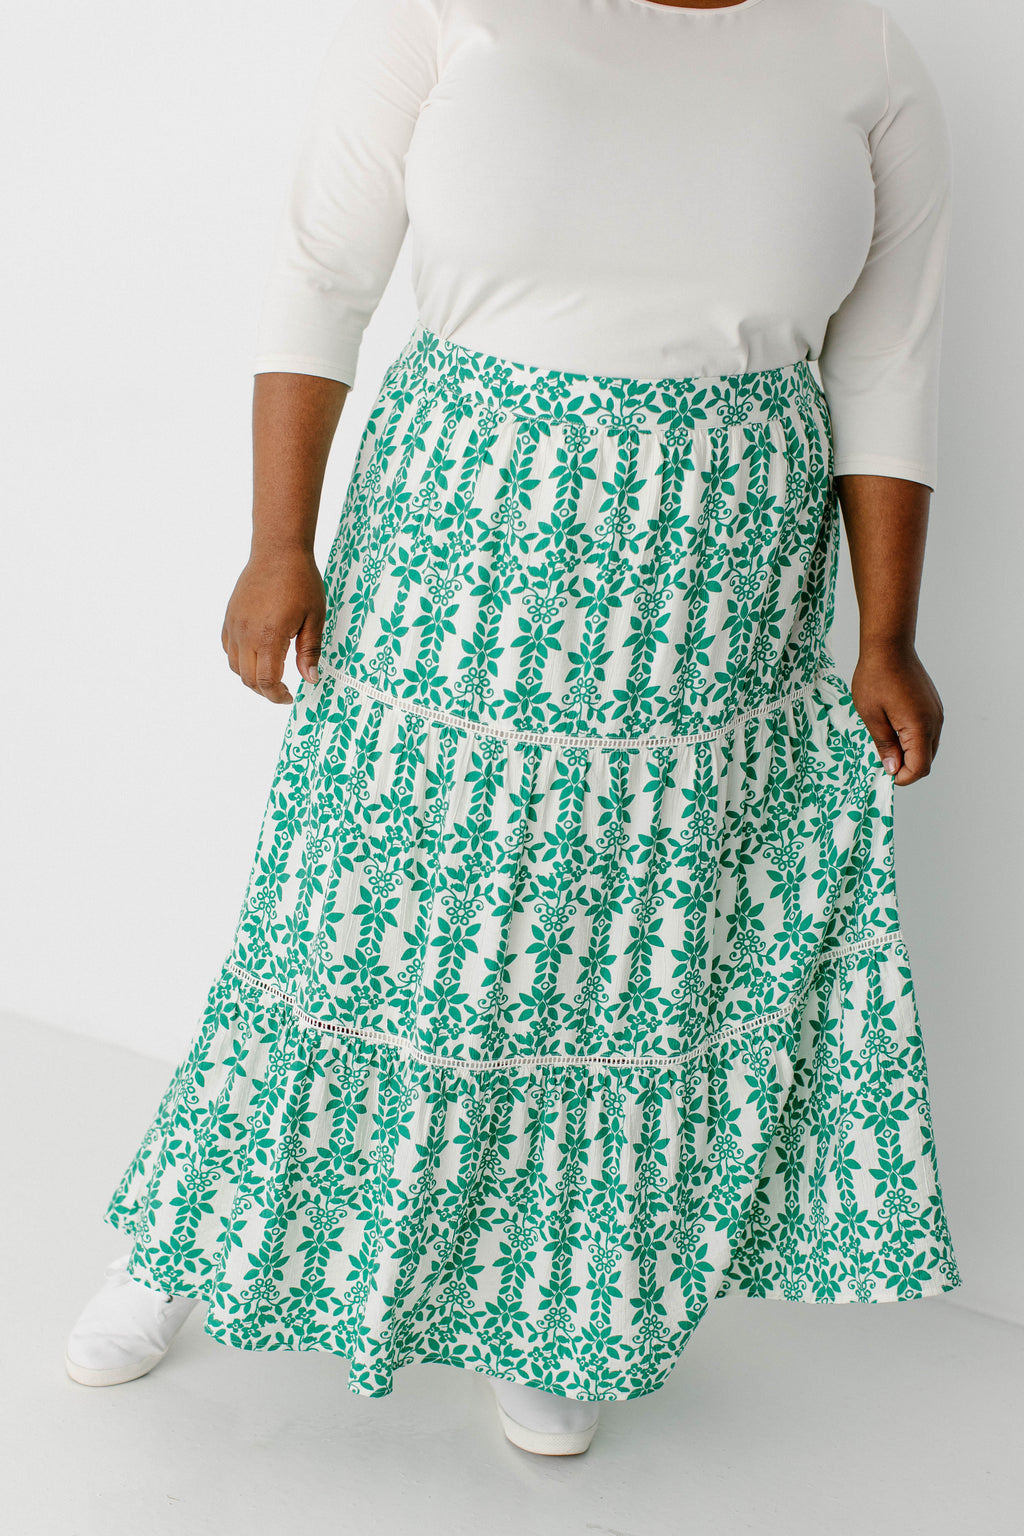 Plus 'Giselle' Kelly Green Floral Print Skirt in Ivory